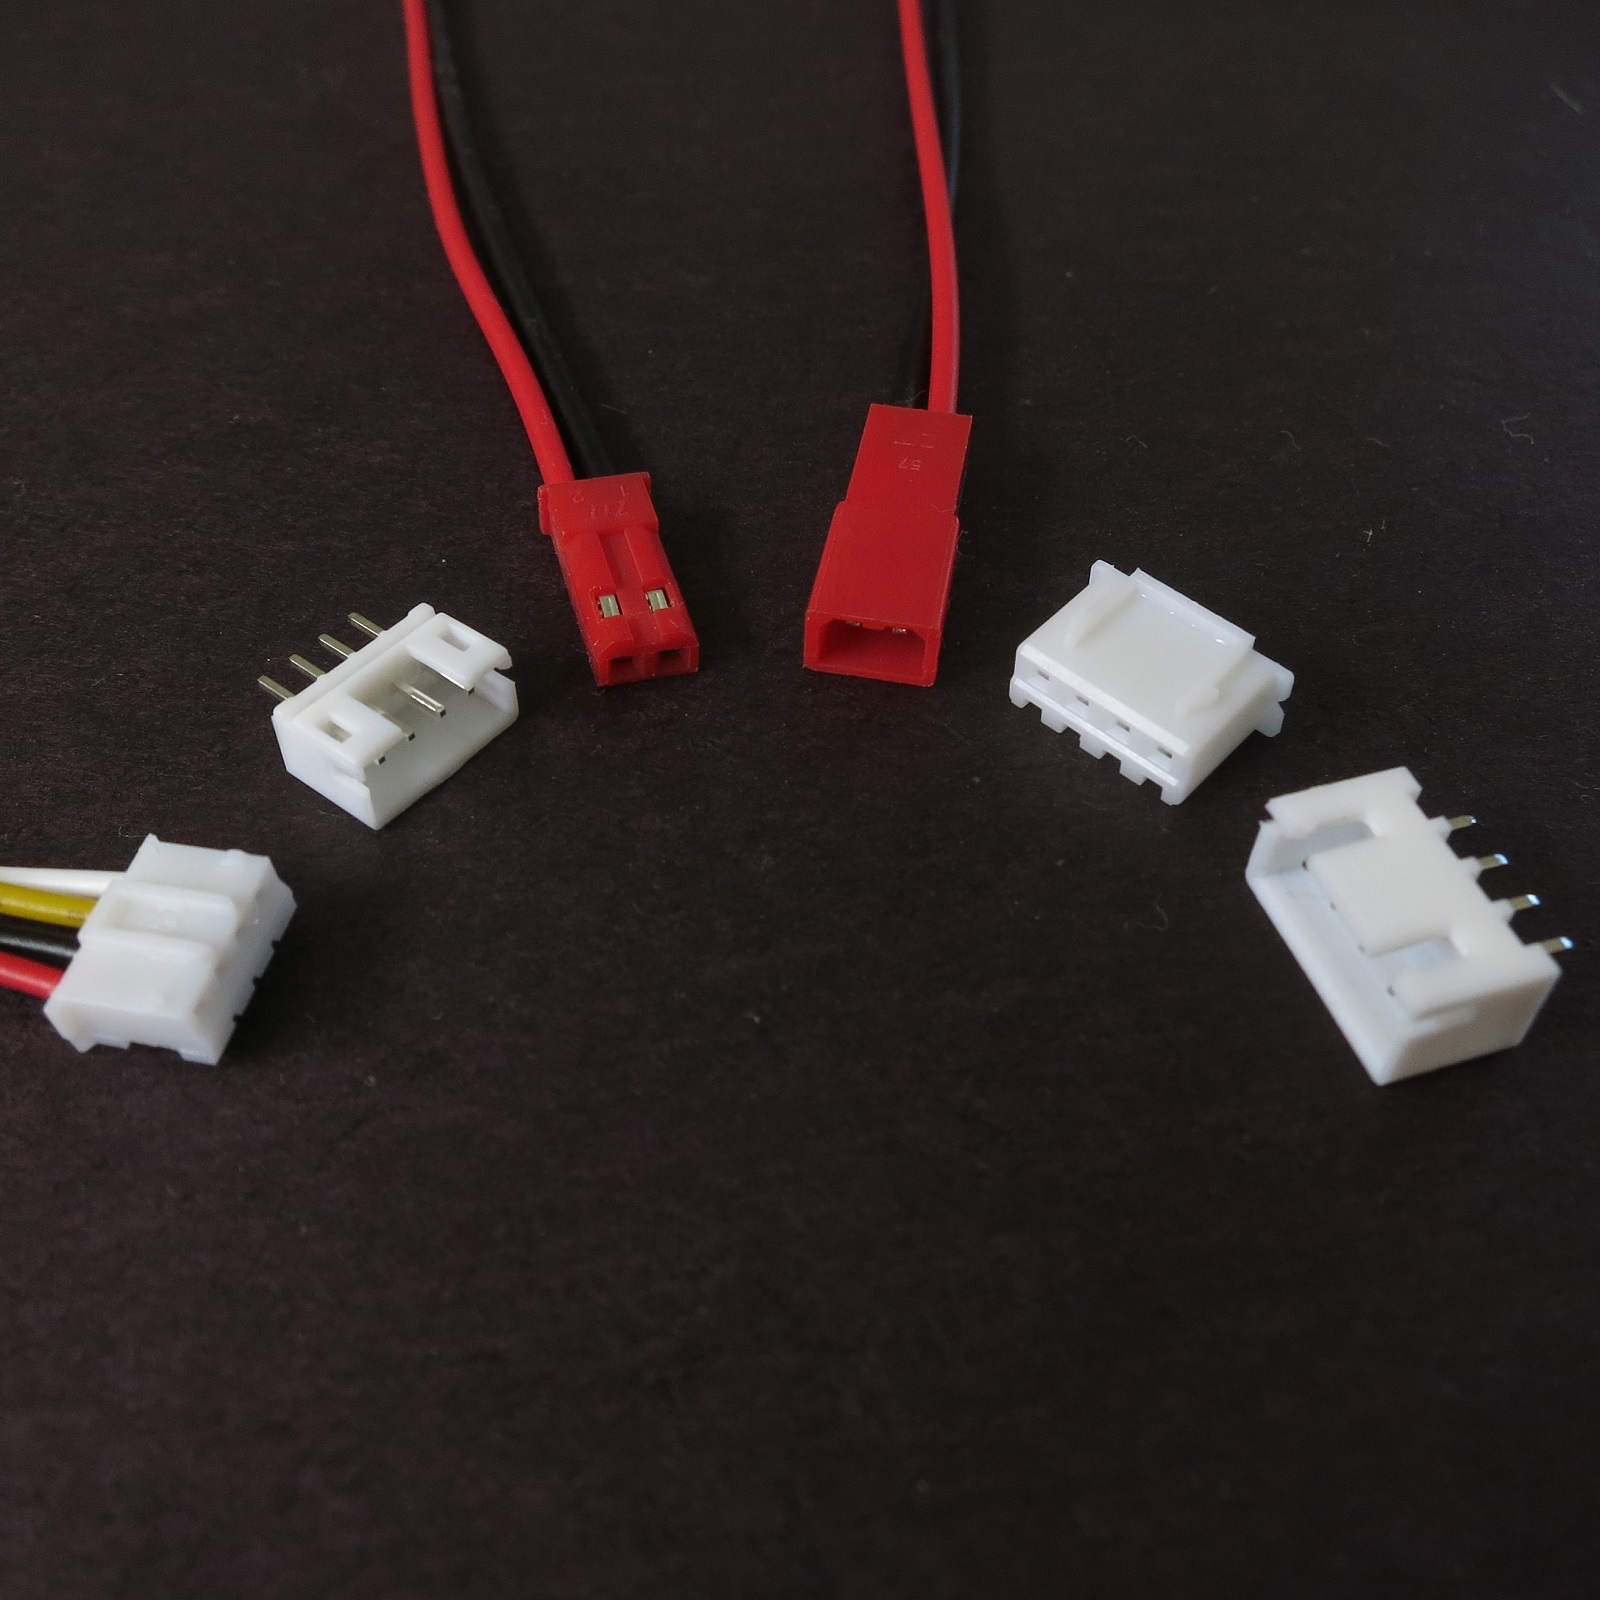 jst connector malaysia